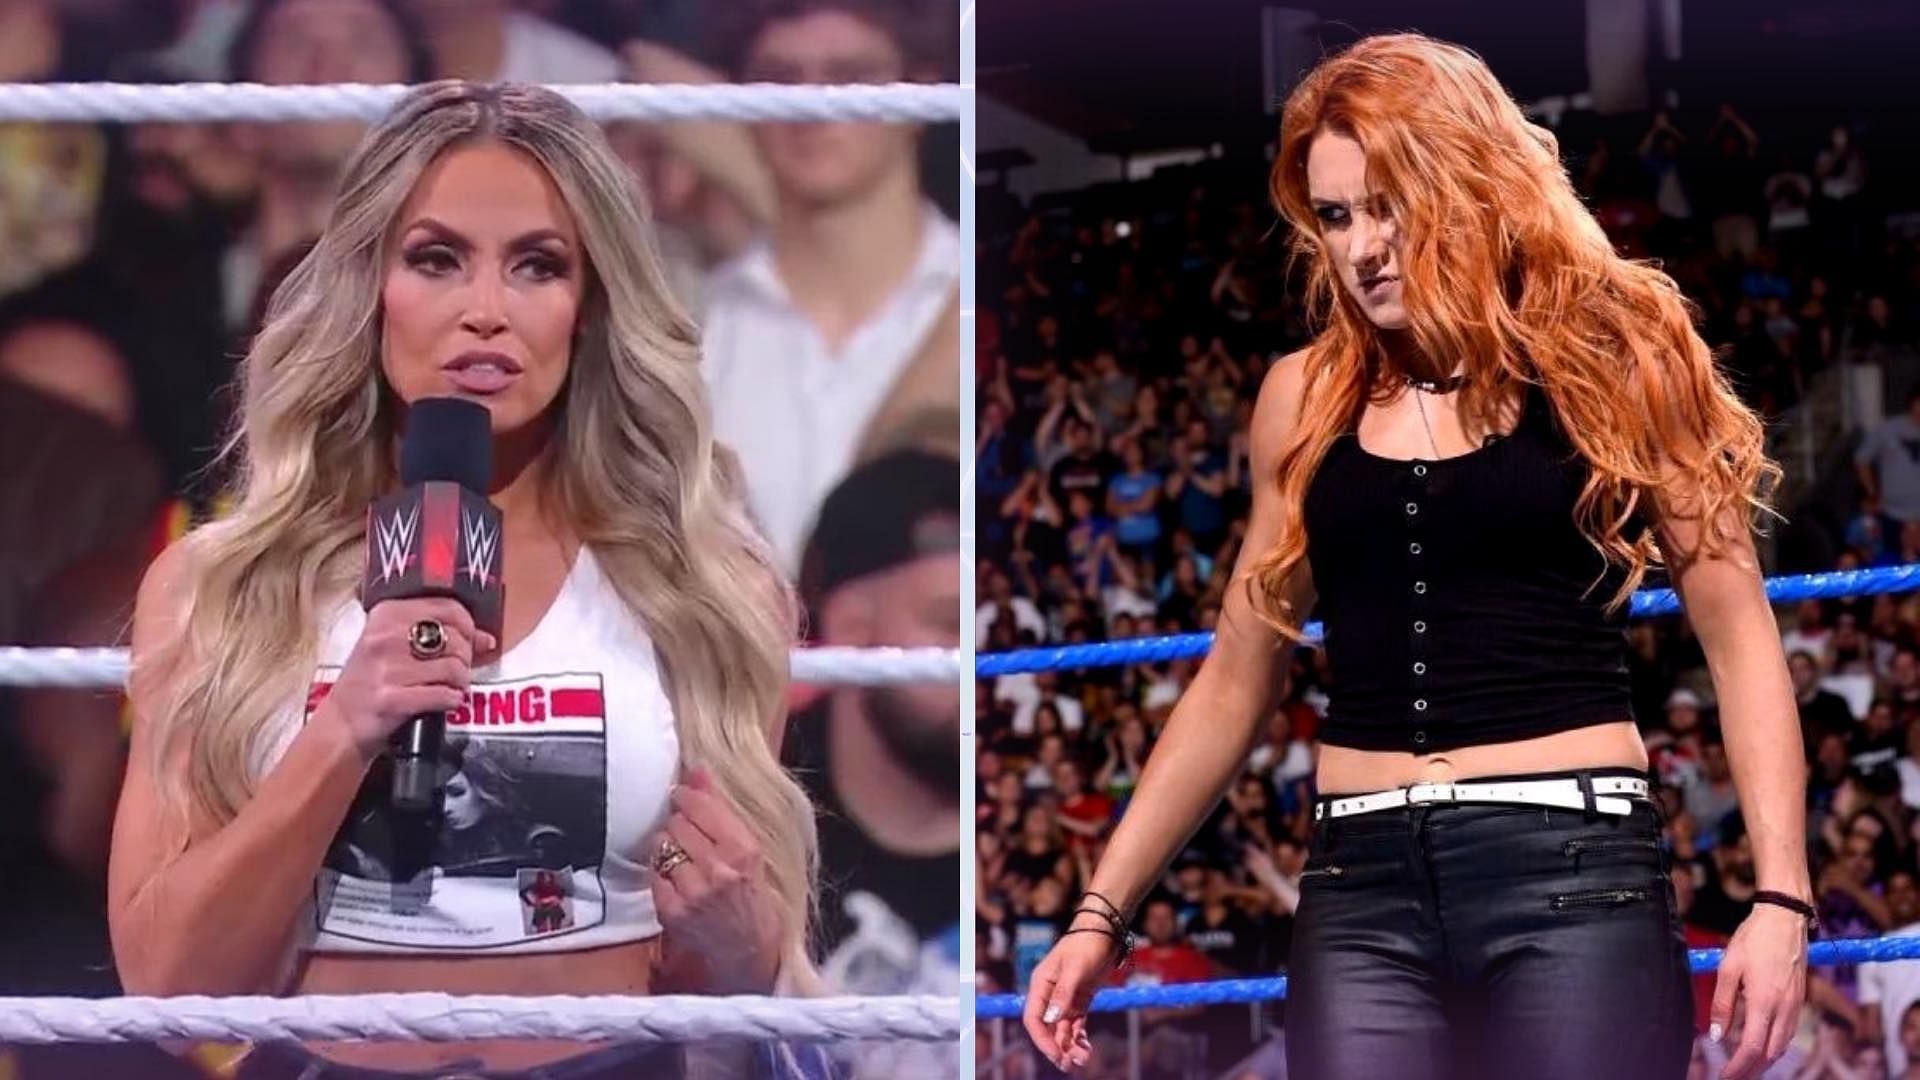 WWE RAW featured a heated brawl between Trish Stratus and Becky Lynch